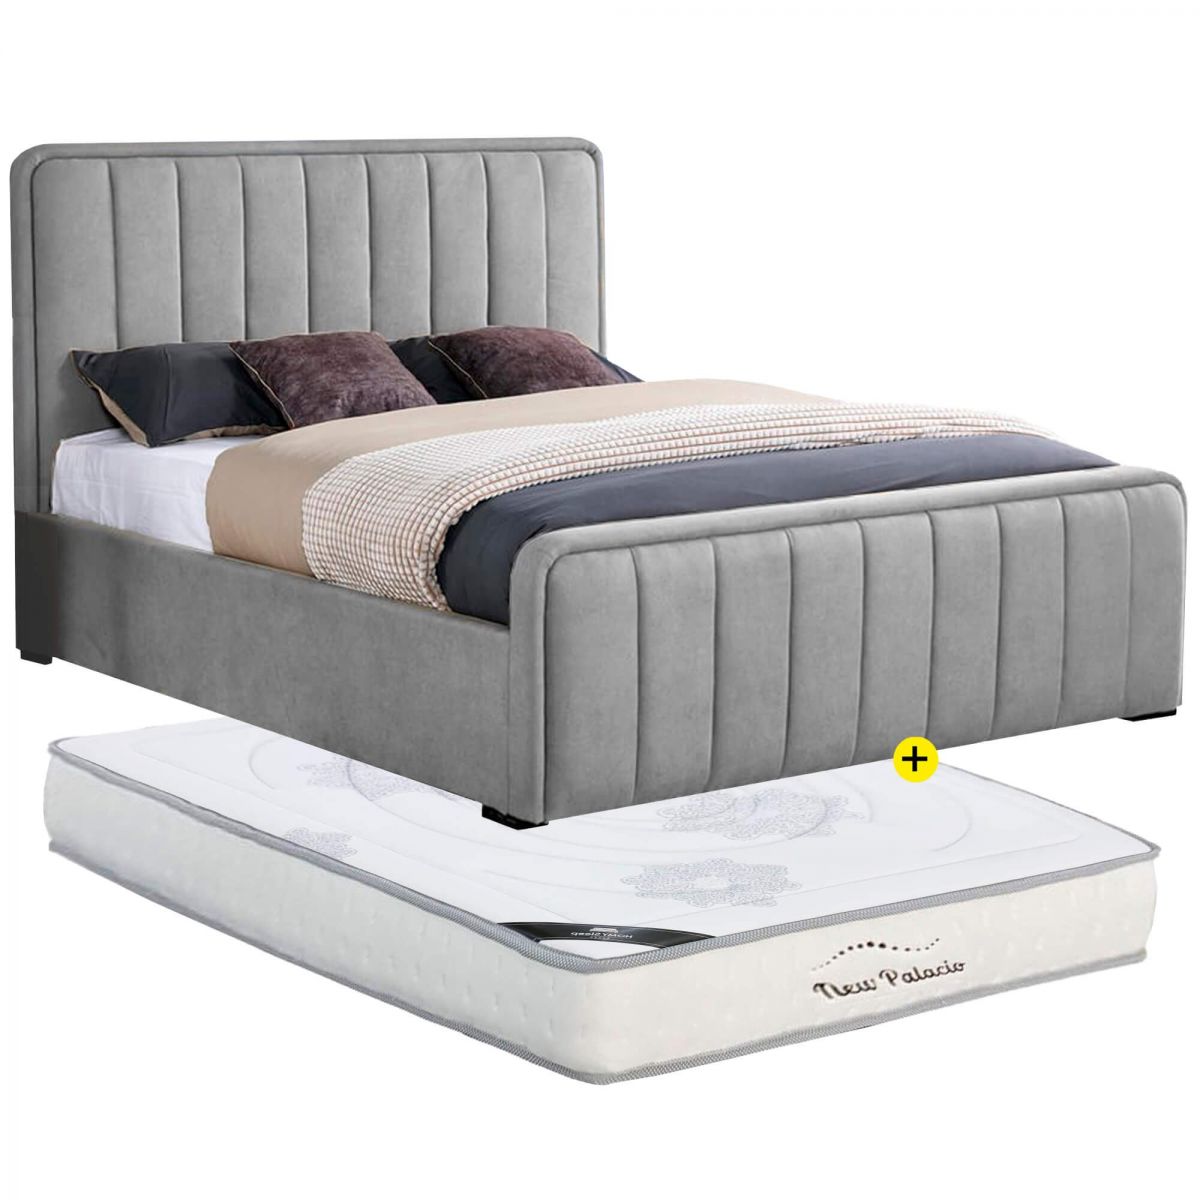 FLOW High Double Bed Pack (Cinza) + NEW PALACIO Mattress 160x200cm